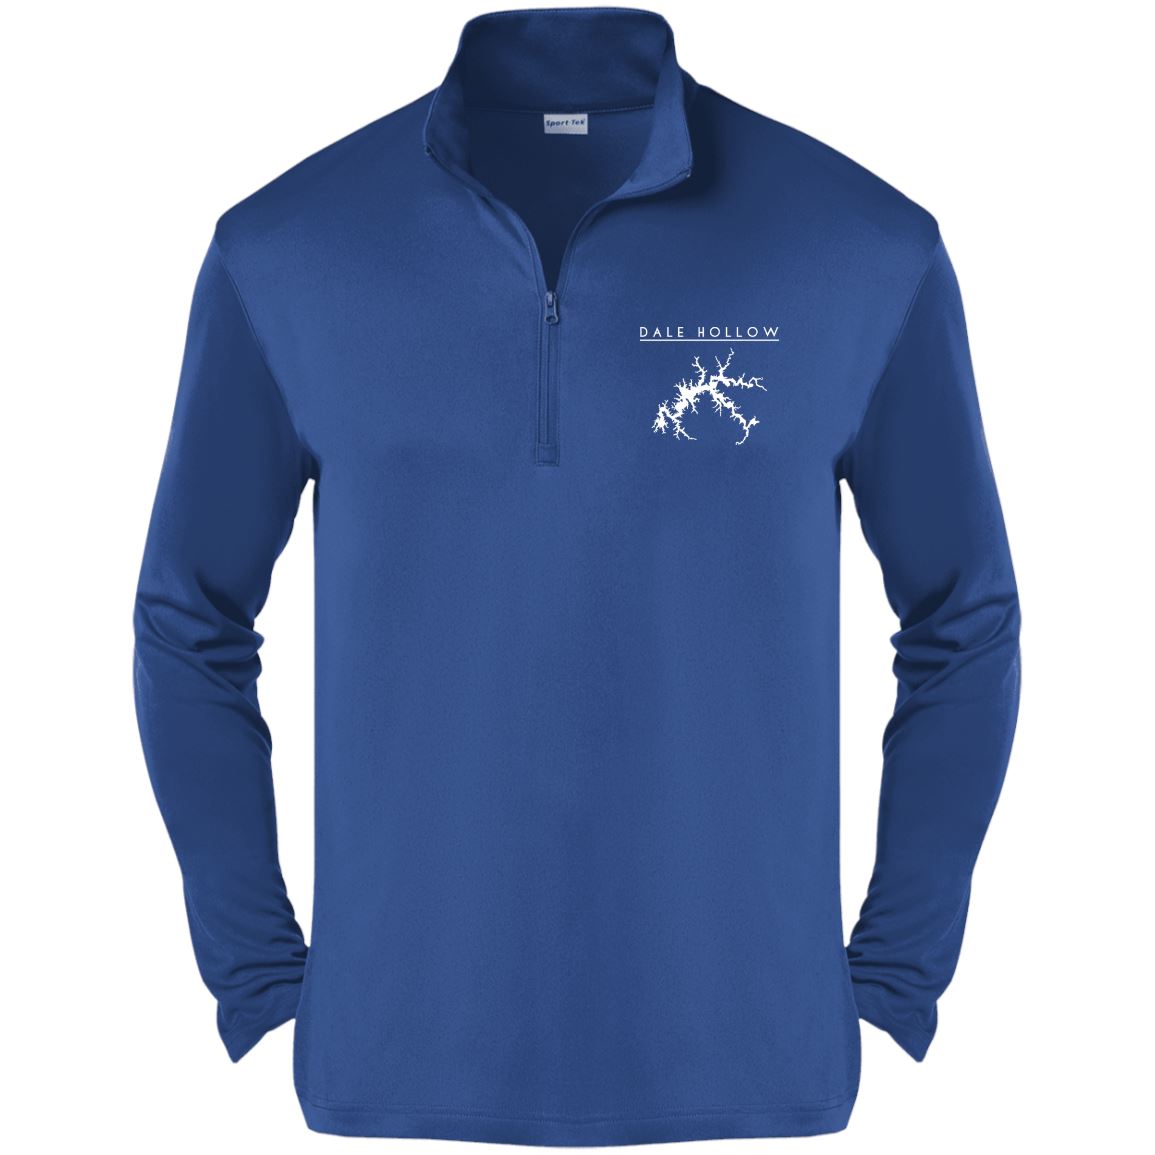 Dale Hollow Embroidered Sport-Tek Competitor 1/4-Zip Pullover - Houseboat Kings